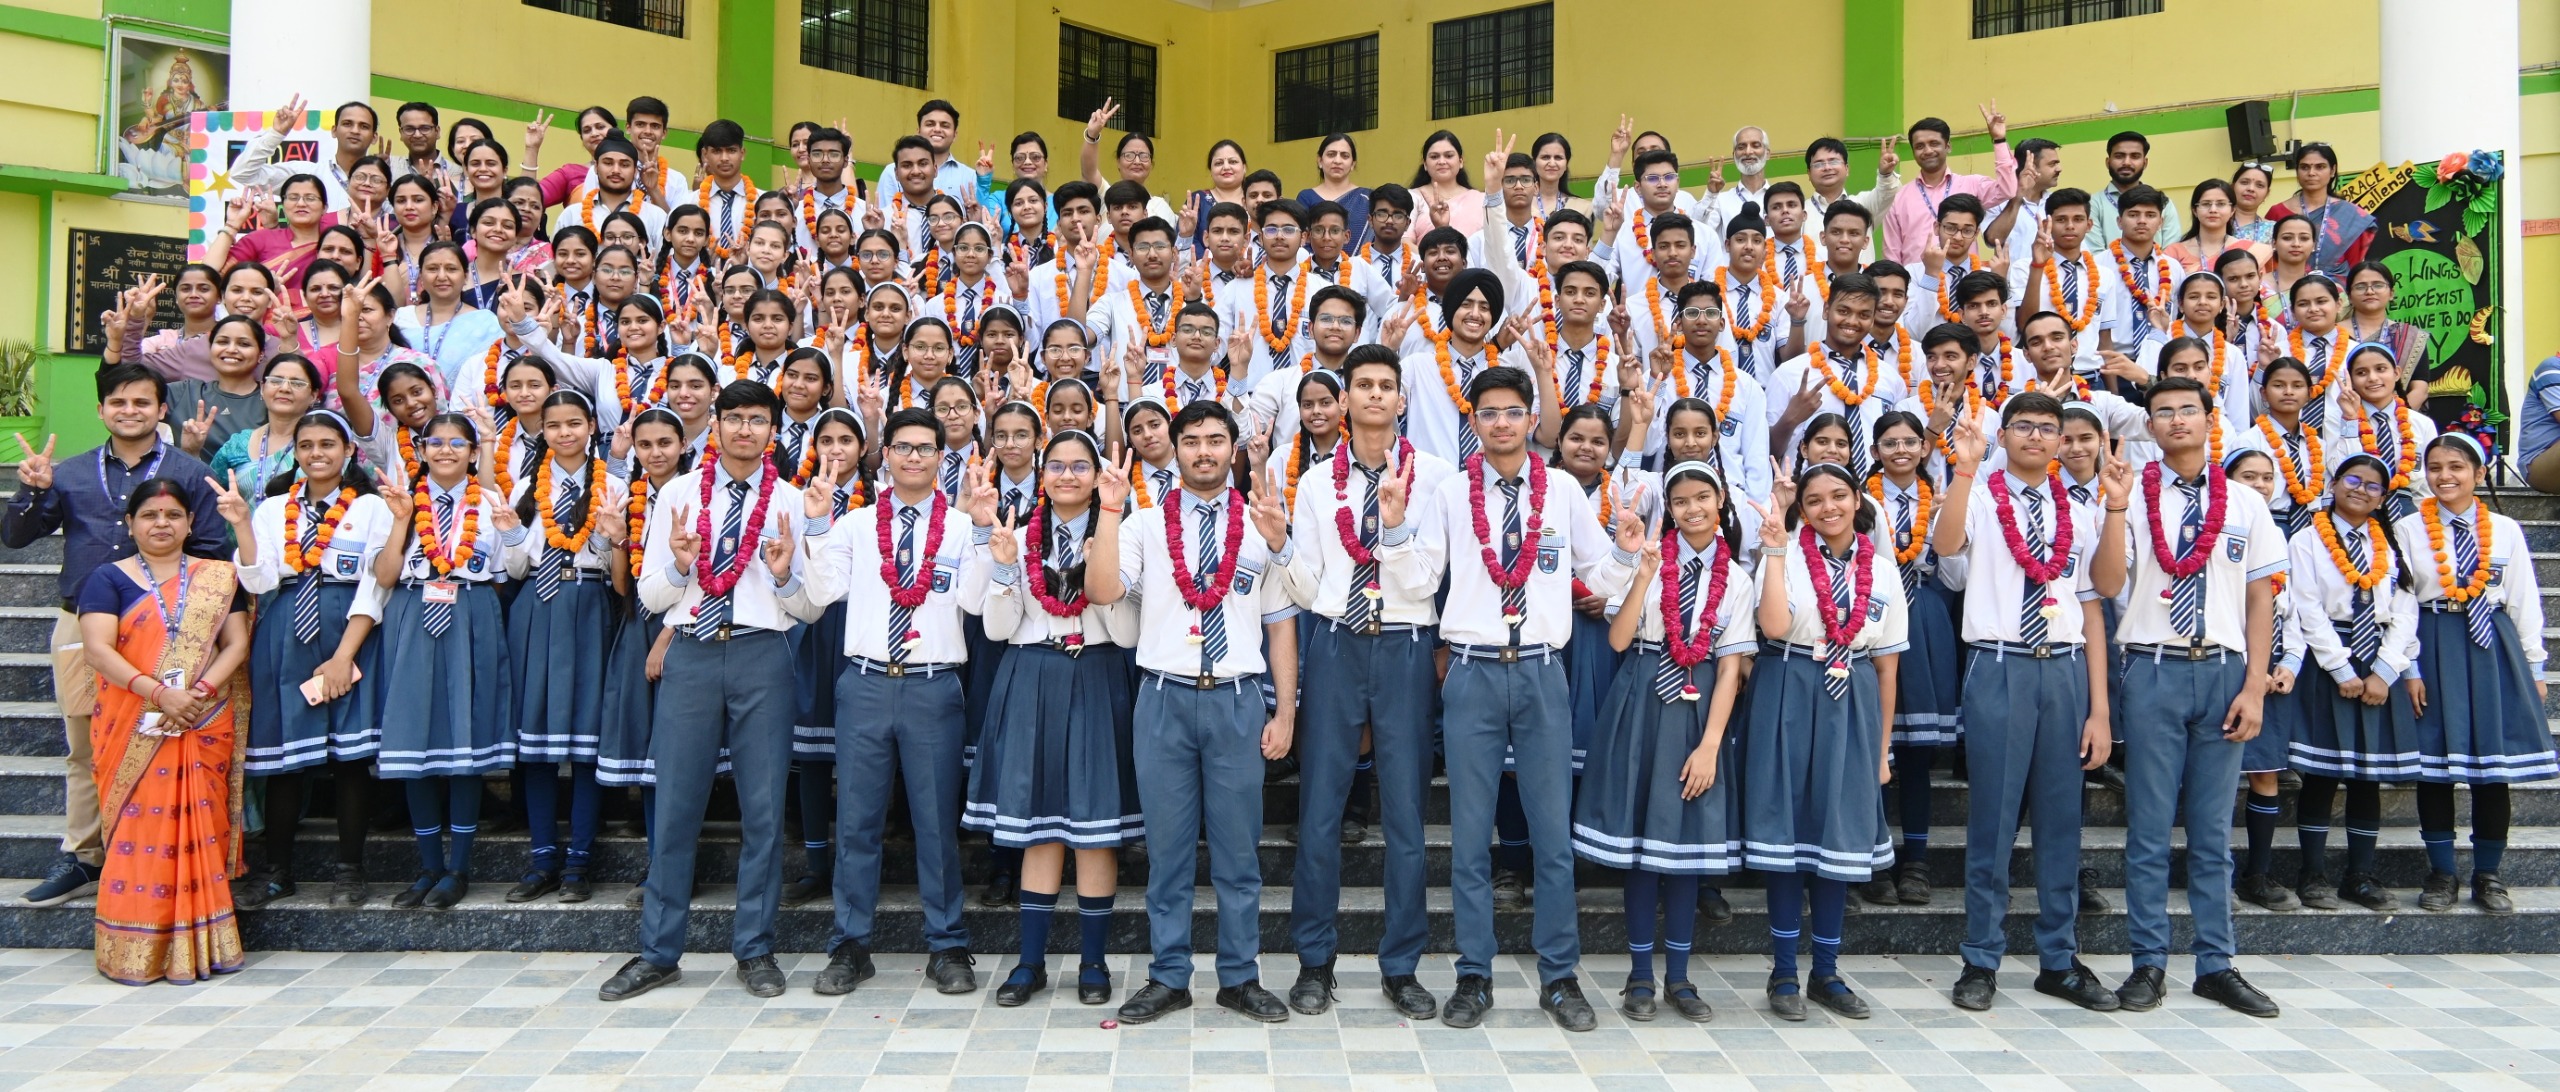 St. Joseph's Prakhar and Imdaad joint toppers with 97.40 percent in ICSE exam results-